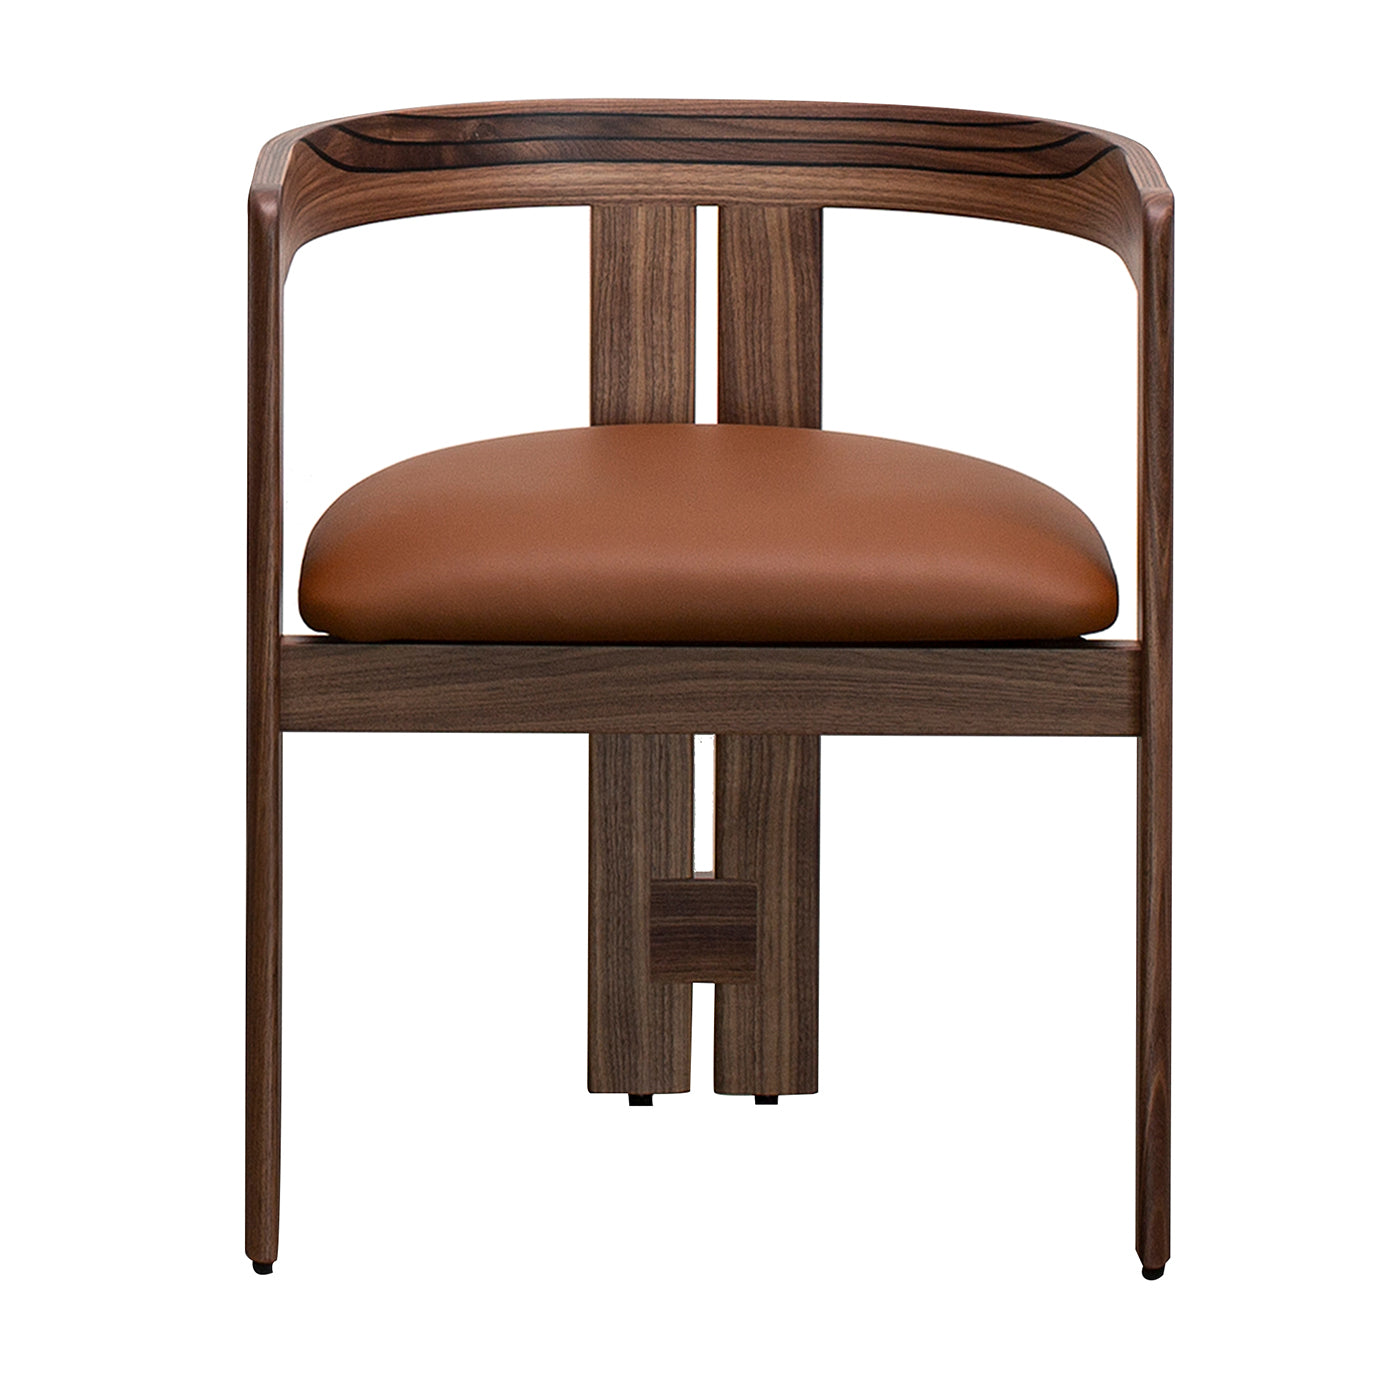 Pigreco Canaletto Brown Leather Chair by Tobia Scarpa - Main view